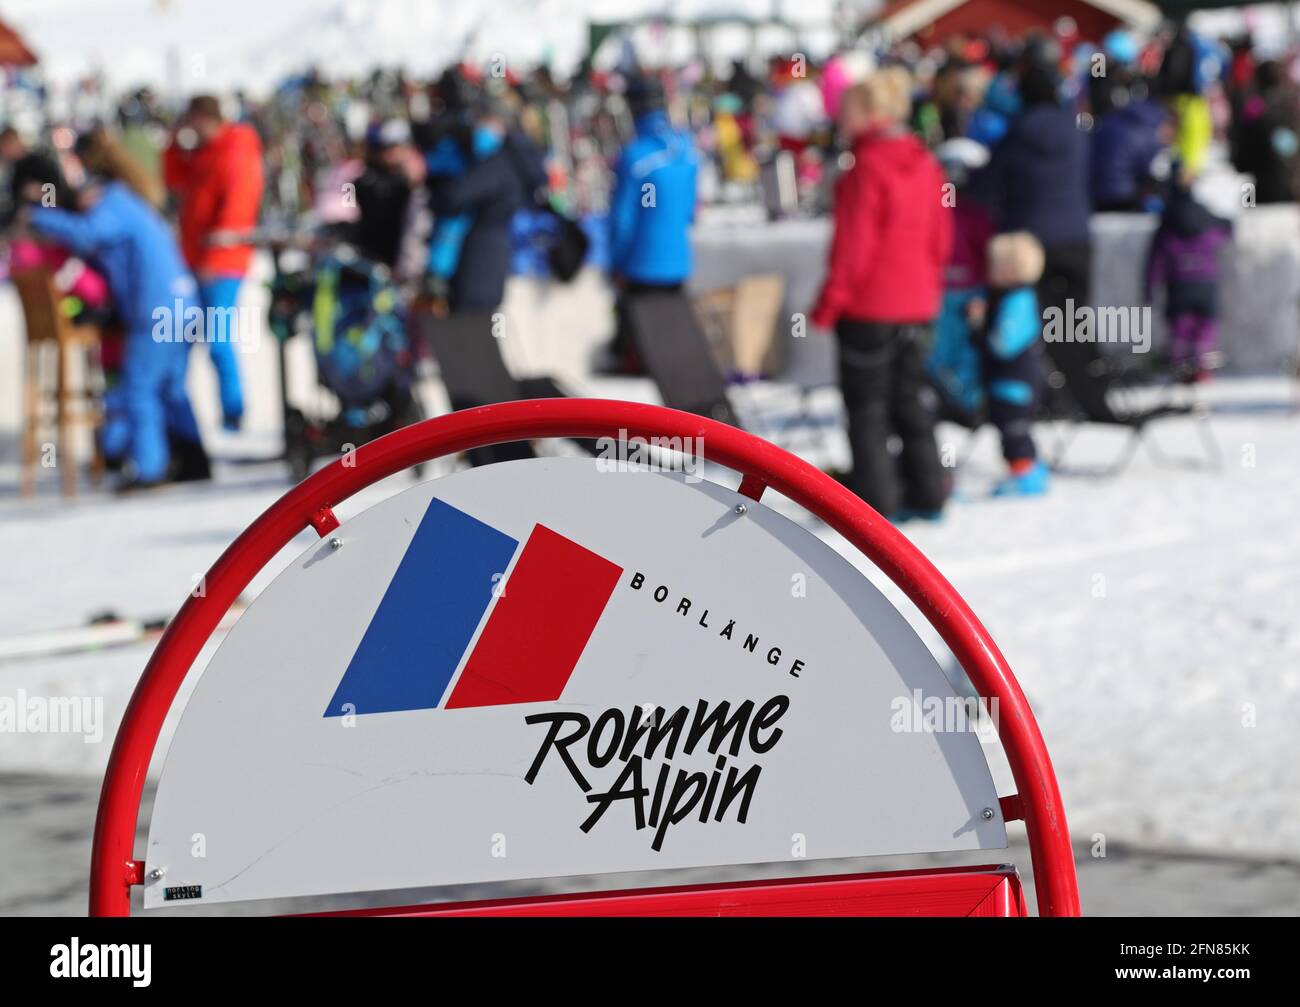 Romme alpin sweden ski hi-res stock photography and images - Alamy